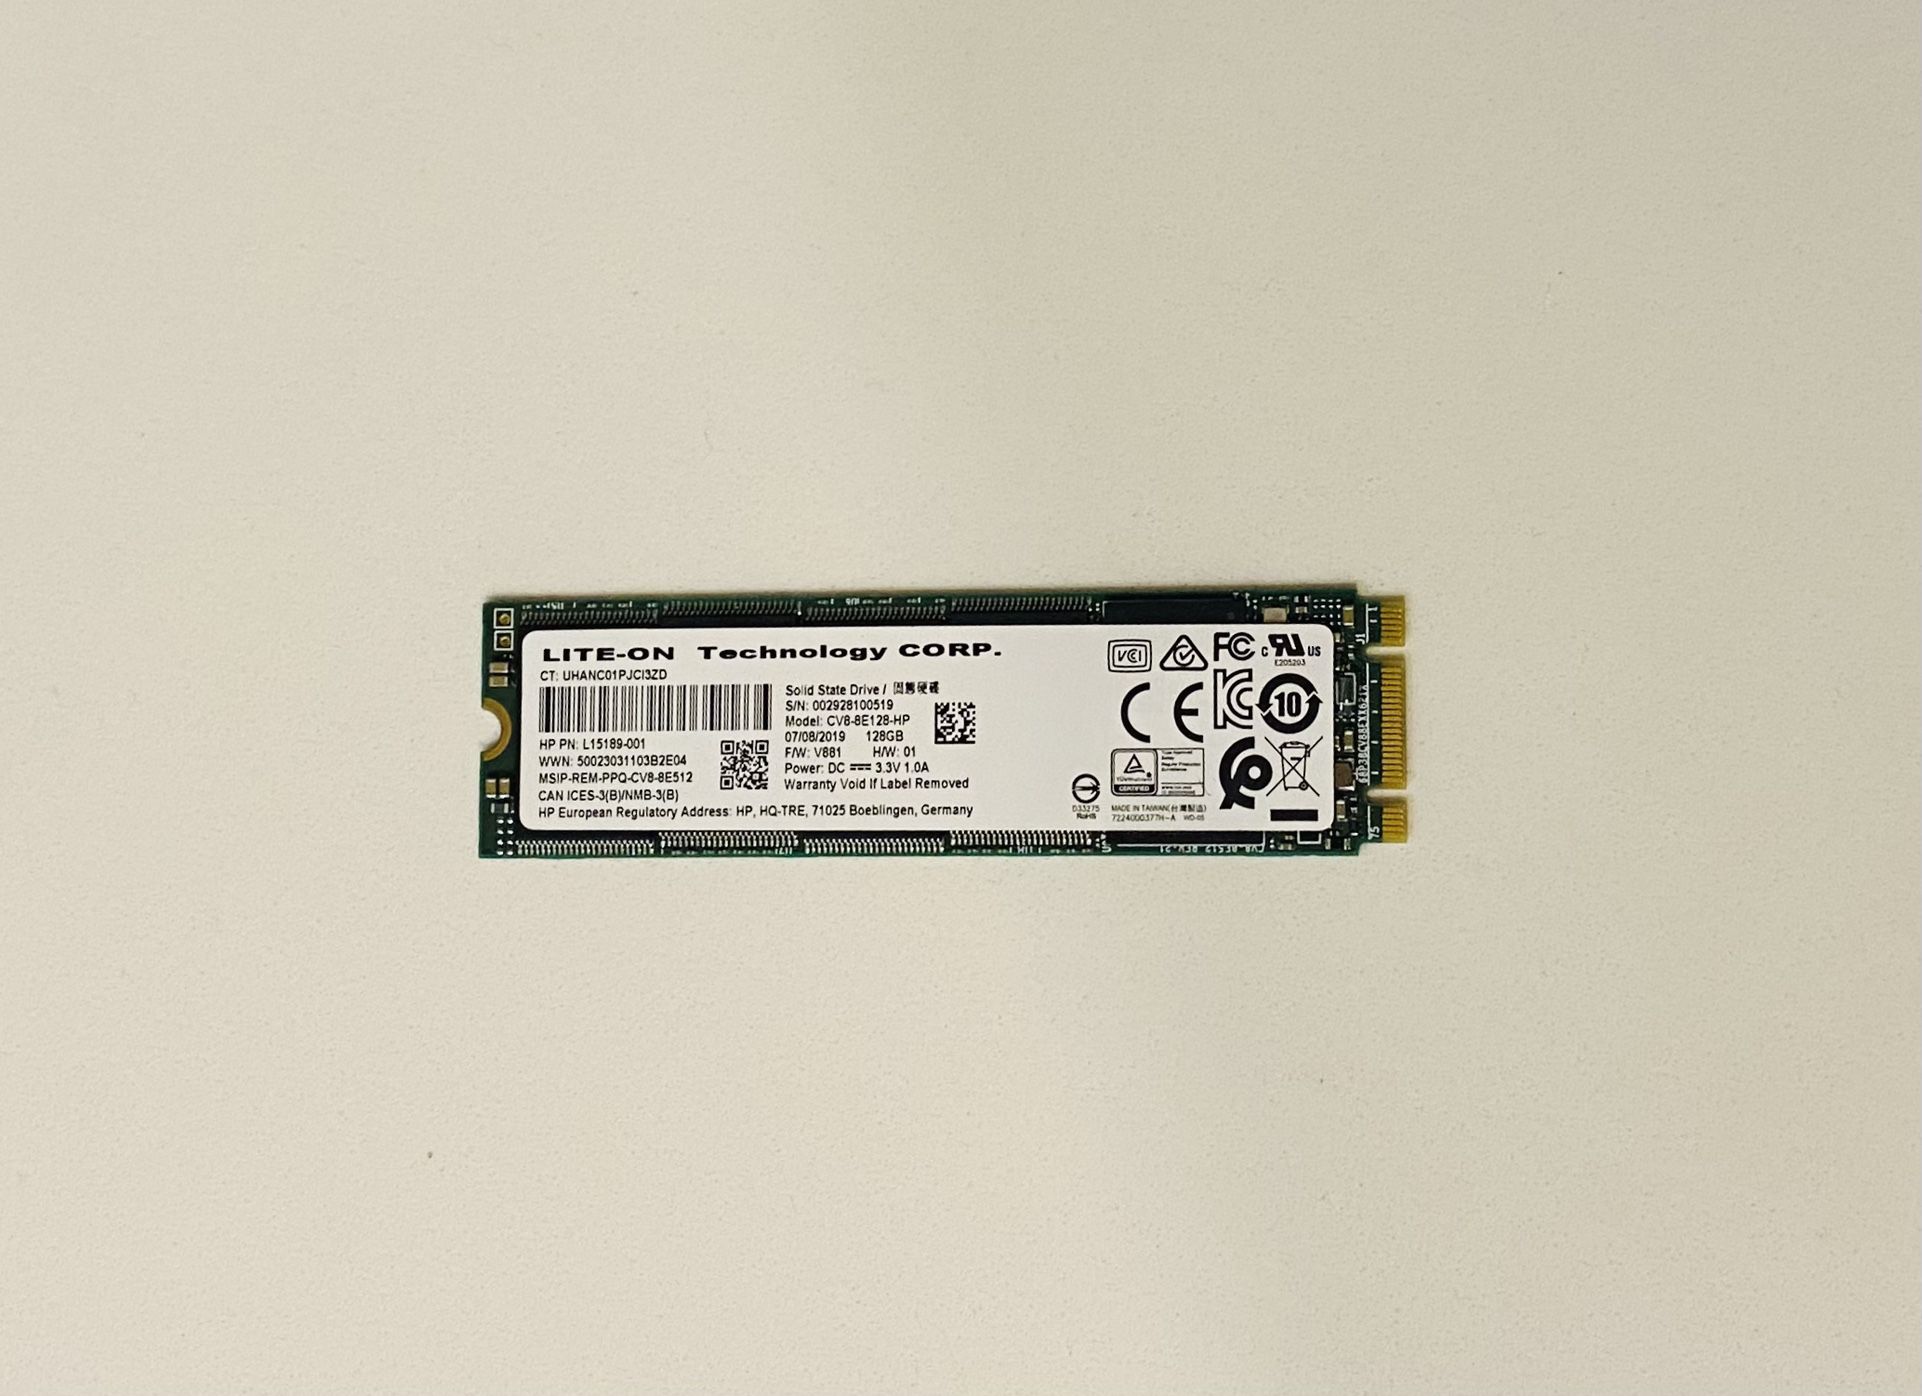 SSD M2 NVme VNand  128 GB. Super Fast SSD HDD, For Desktops, Laptops, Tablets and Compatible Devices 